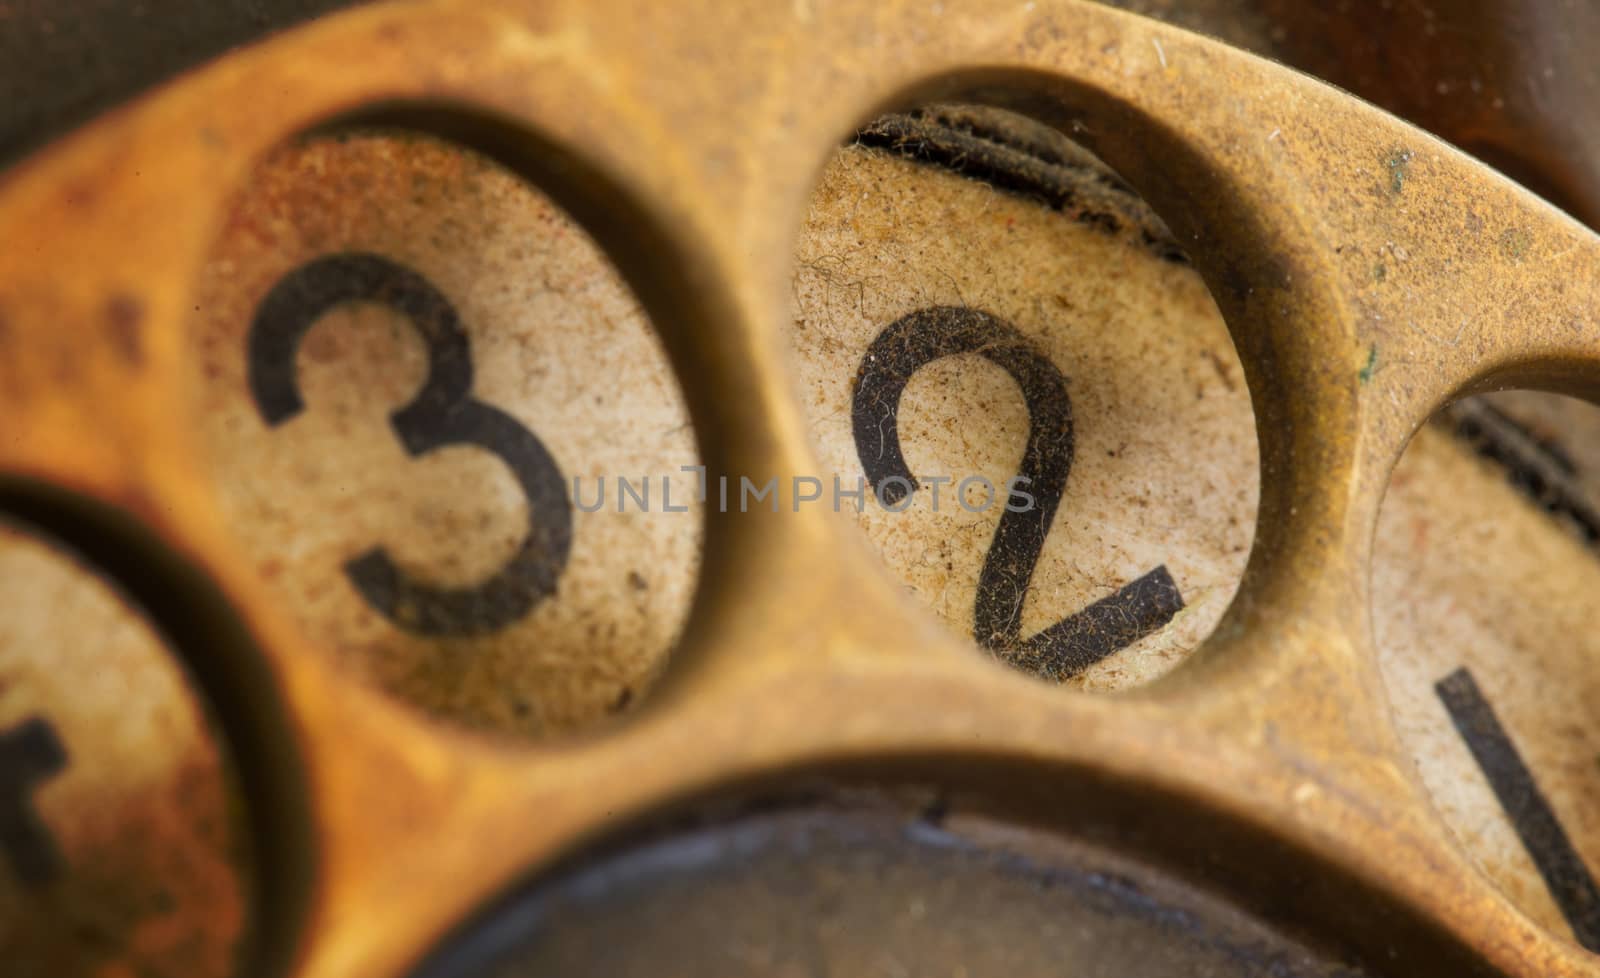 Close up of Vintage phone dial, dirty and scratched - 2, perspective